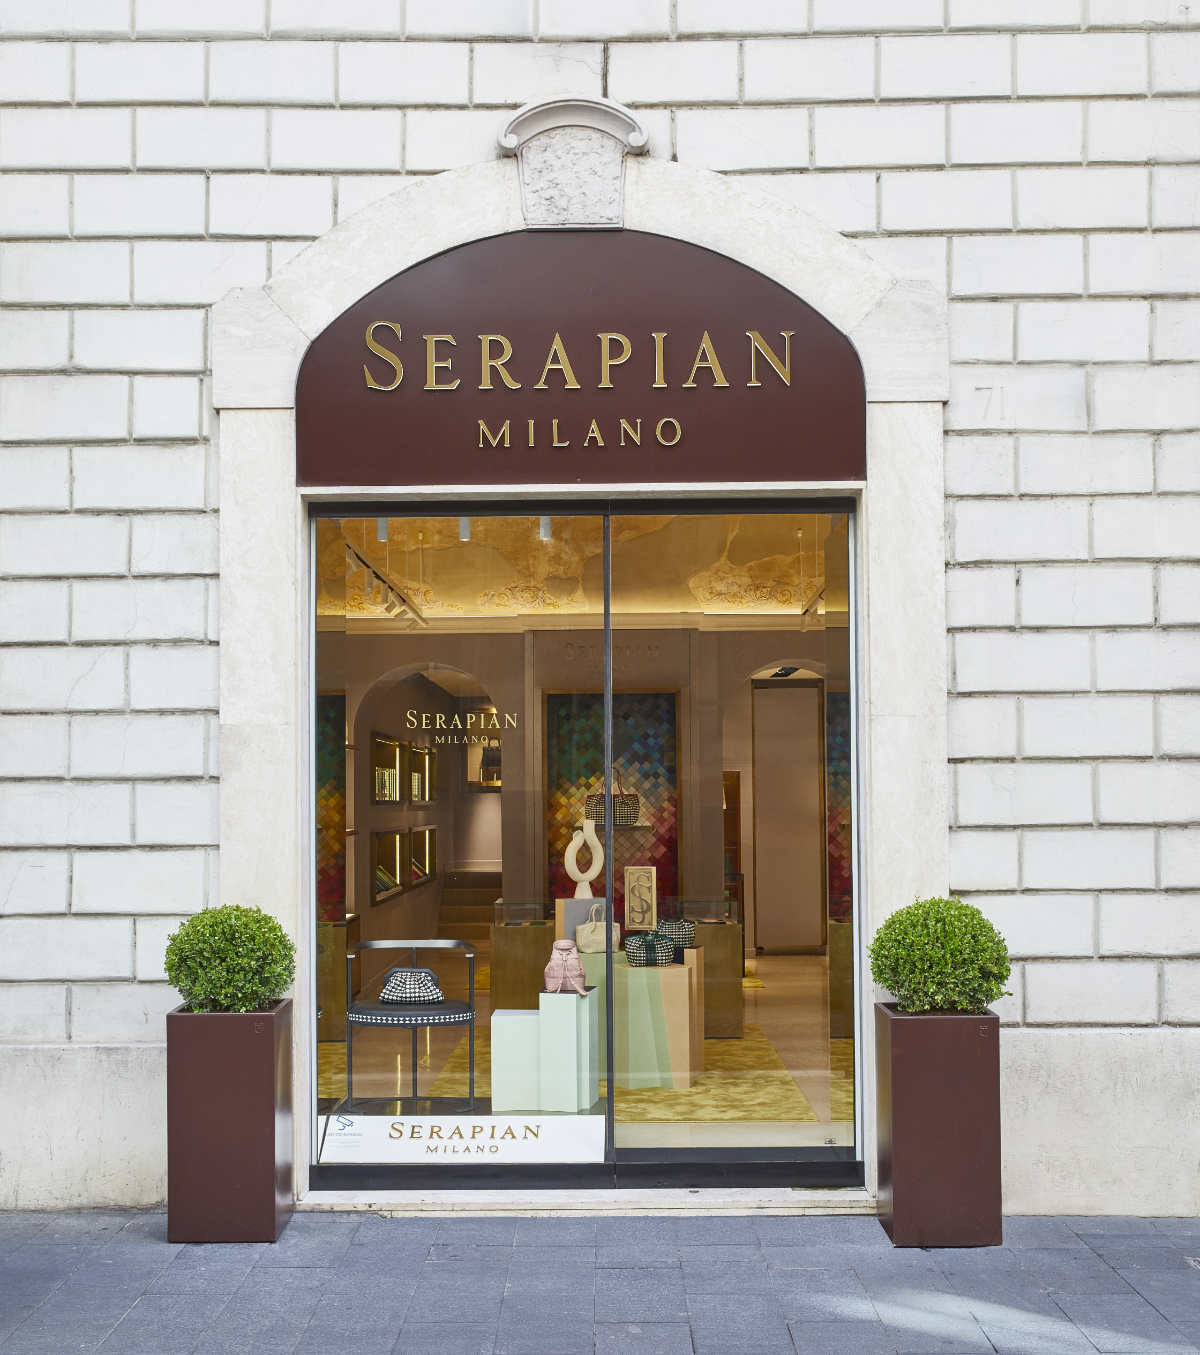 Serapian Re-opened Its Boutique In The Heart Of Rome